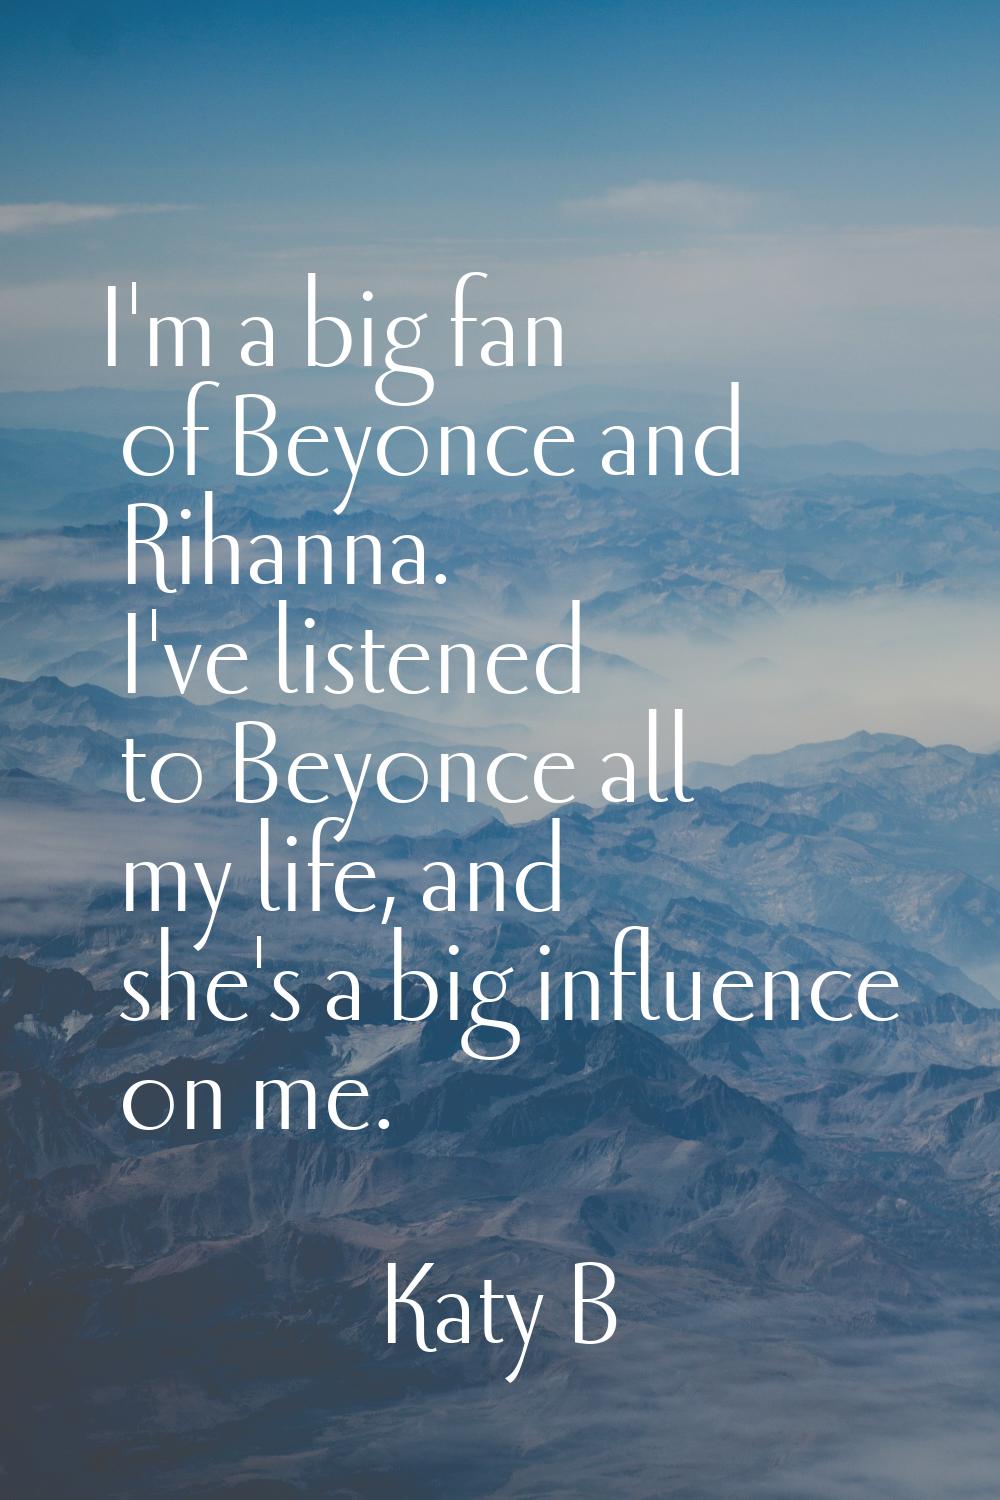 I'm a big fan of Beyonce and Rihanna. I've listened to Beyonce all my life, and she's a big influen